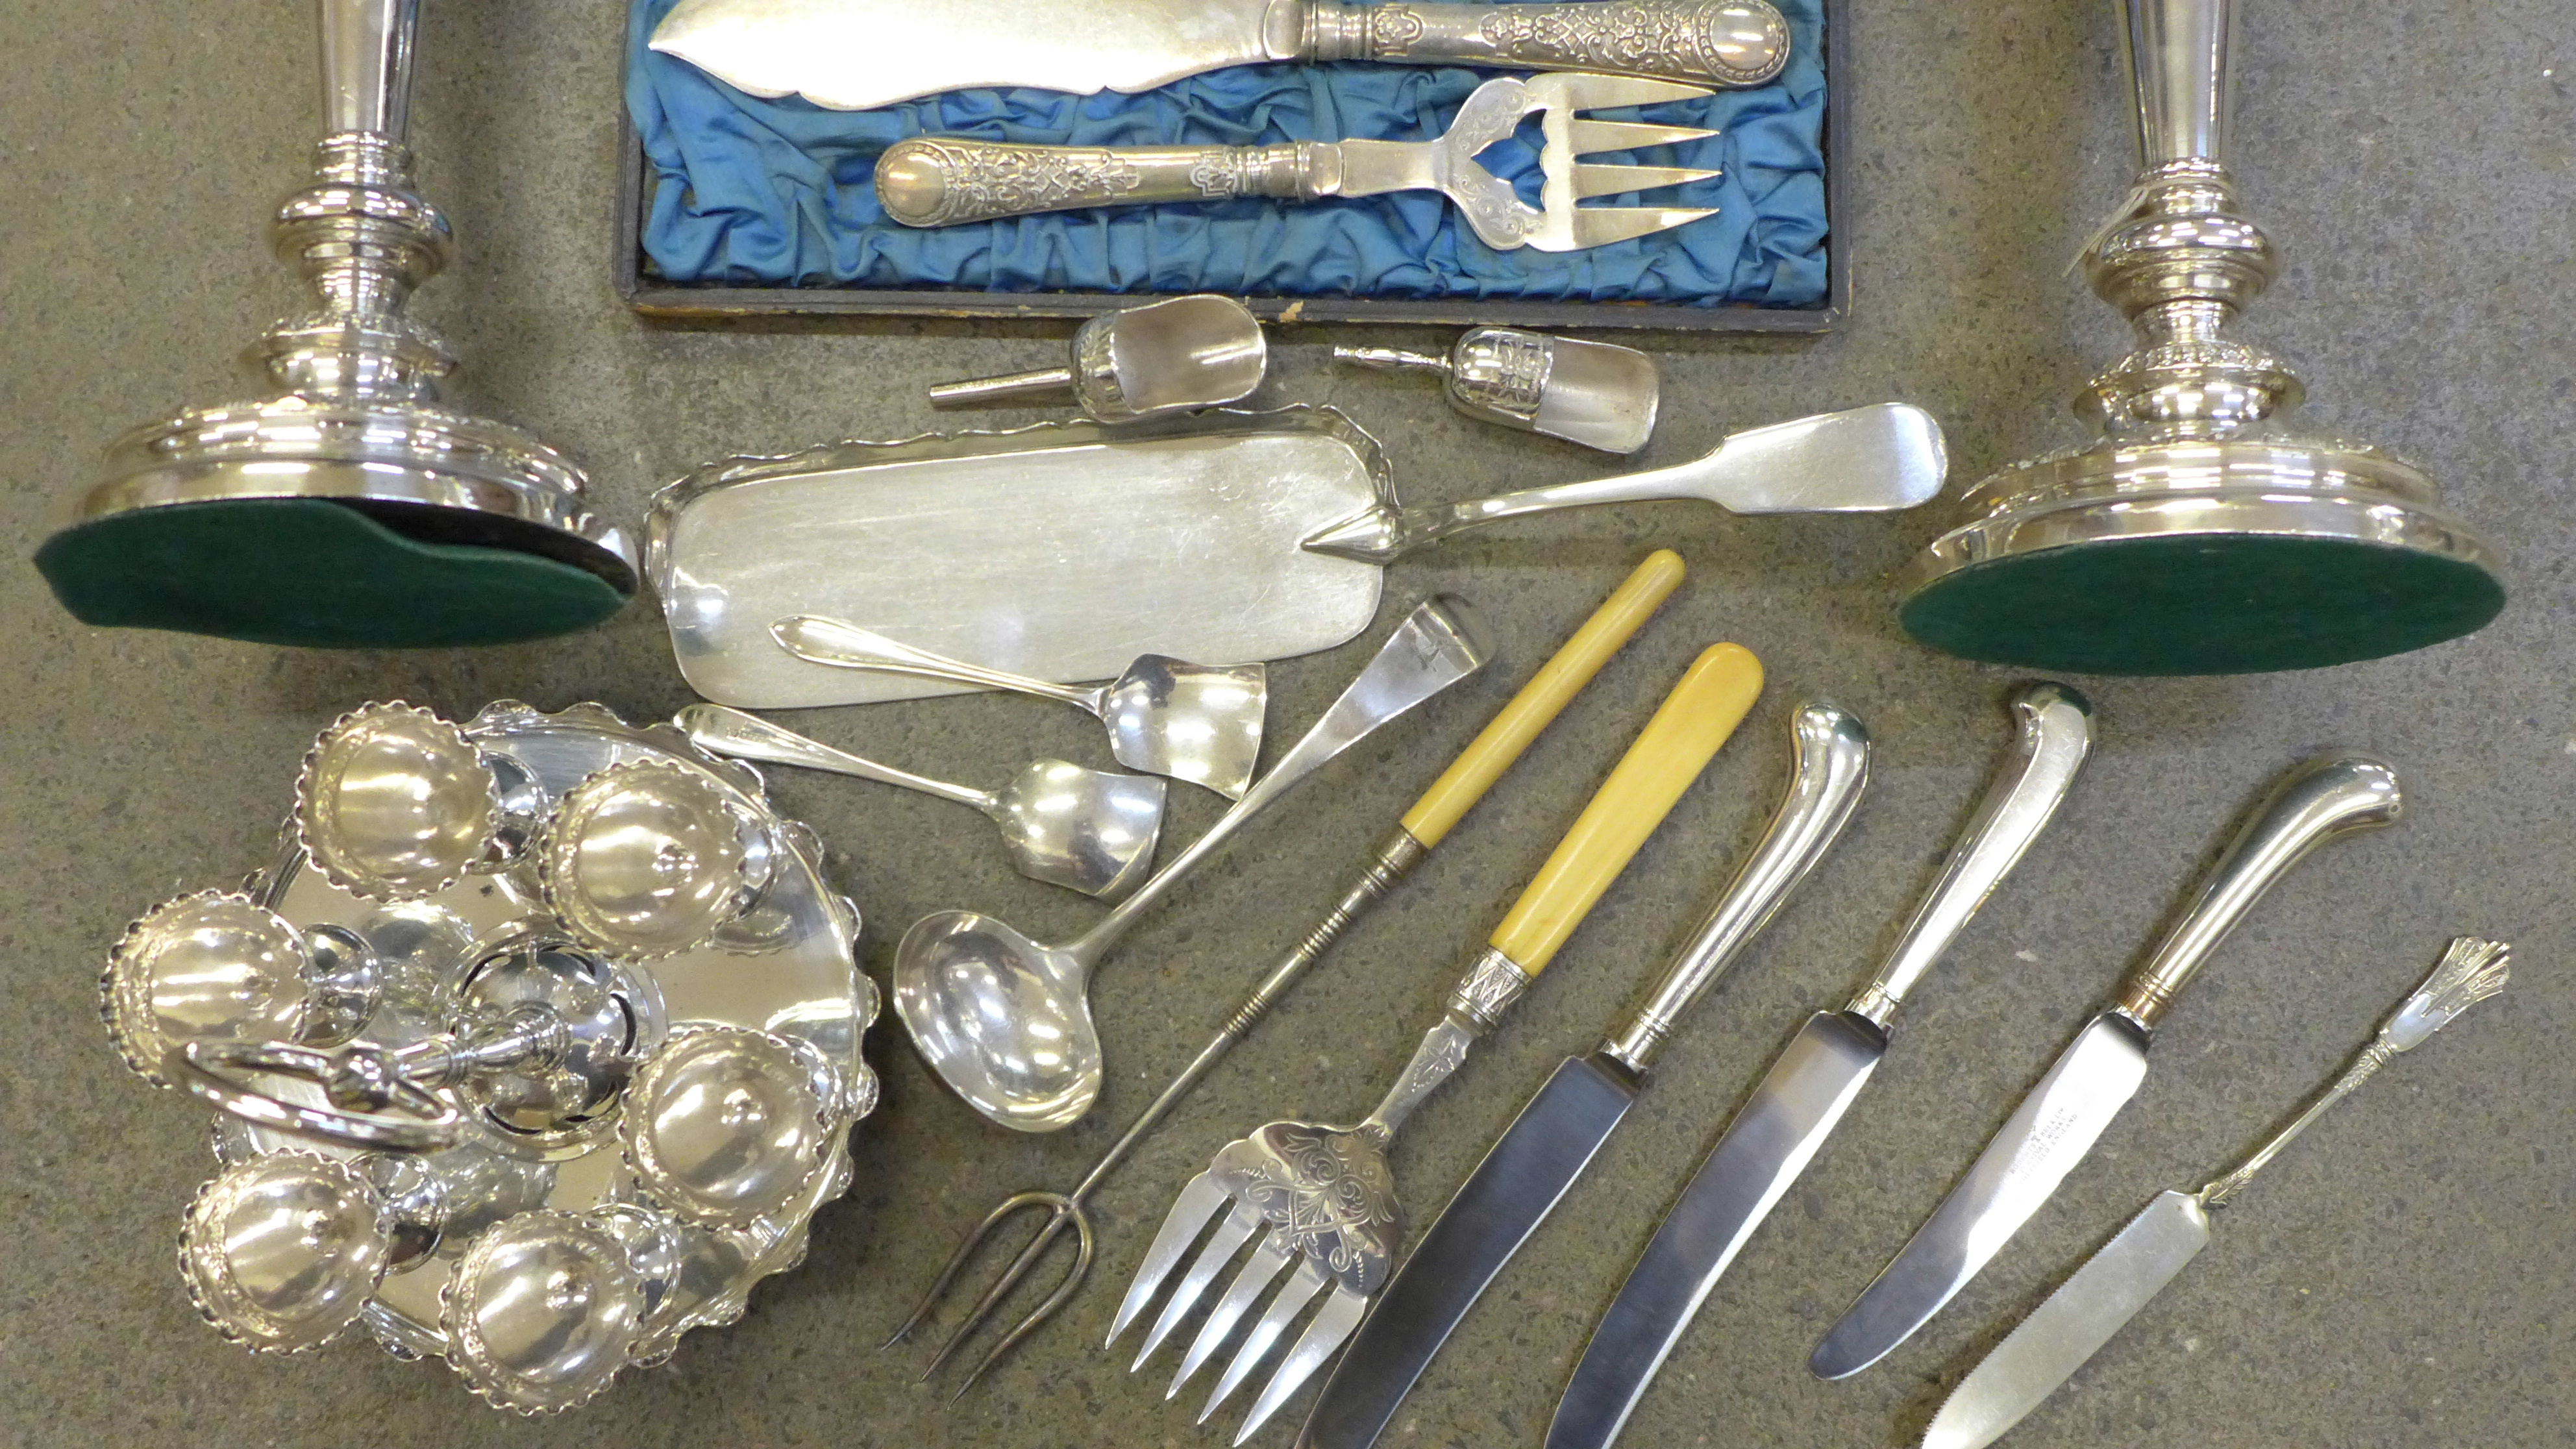 A collection of silver plate, candlesticks, an egg stand, etc. - Image 2 of 4